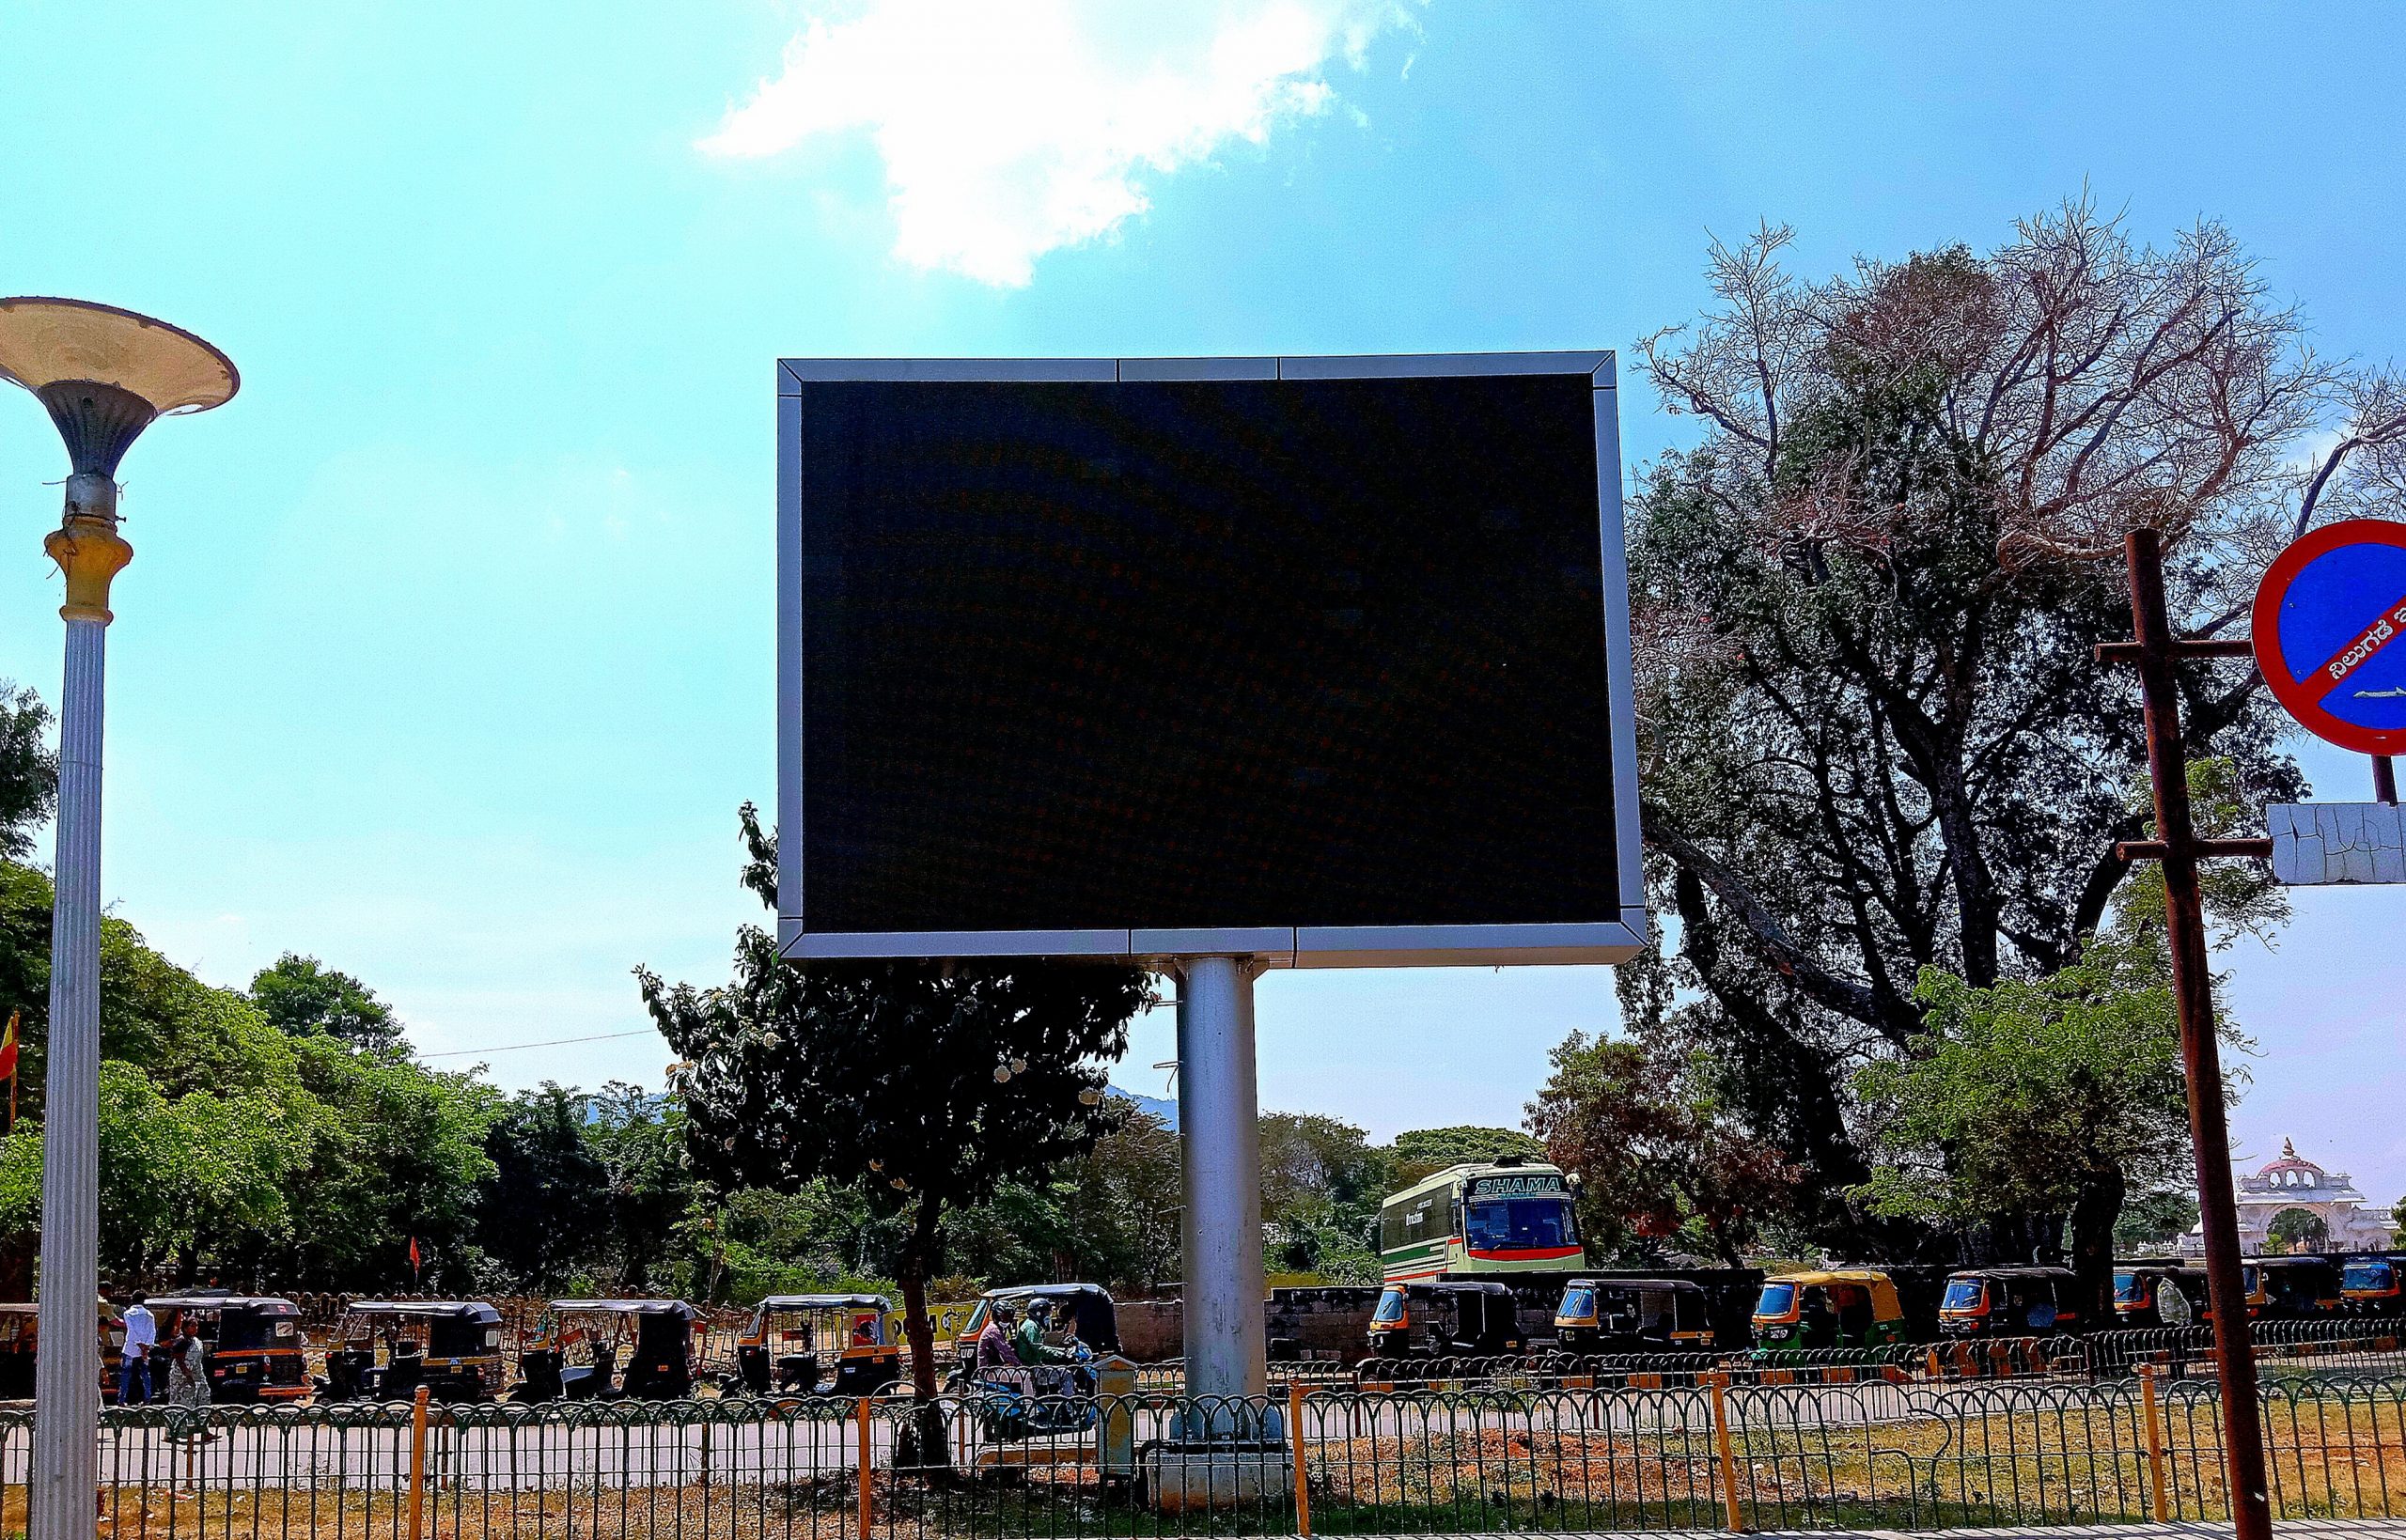 LED display screen at a public place